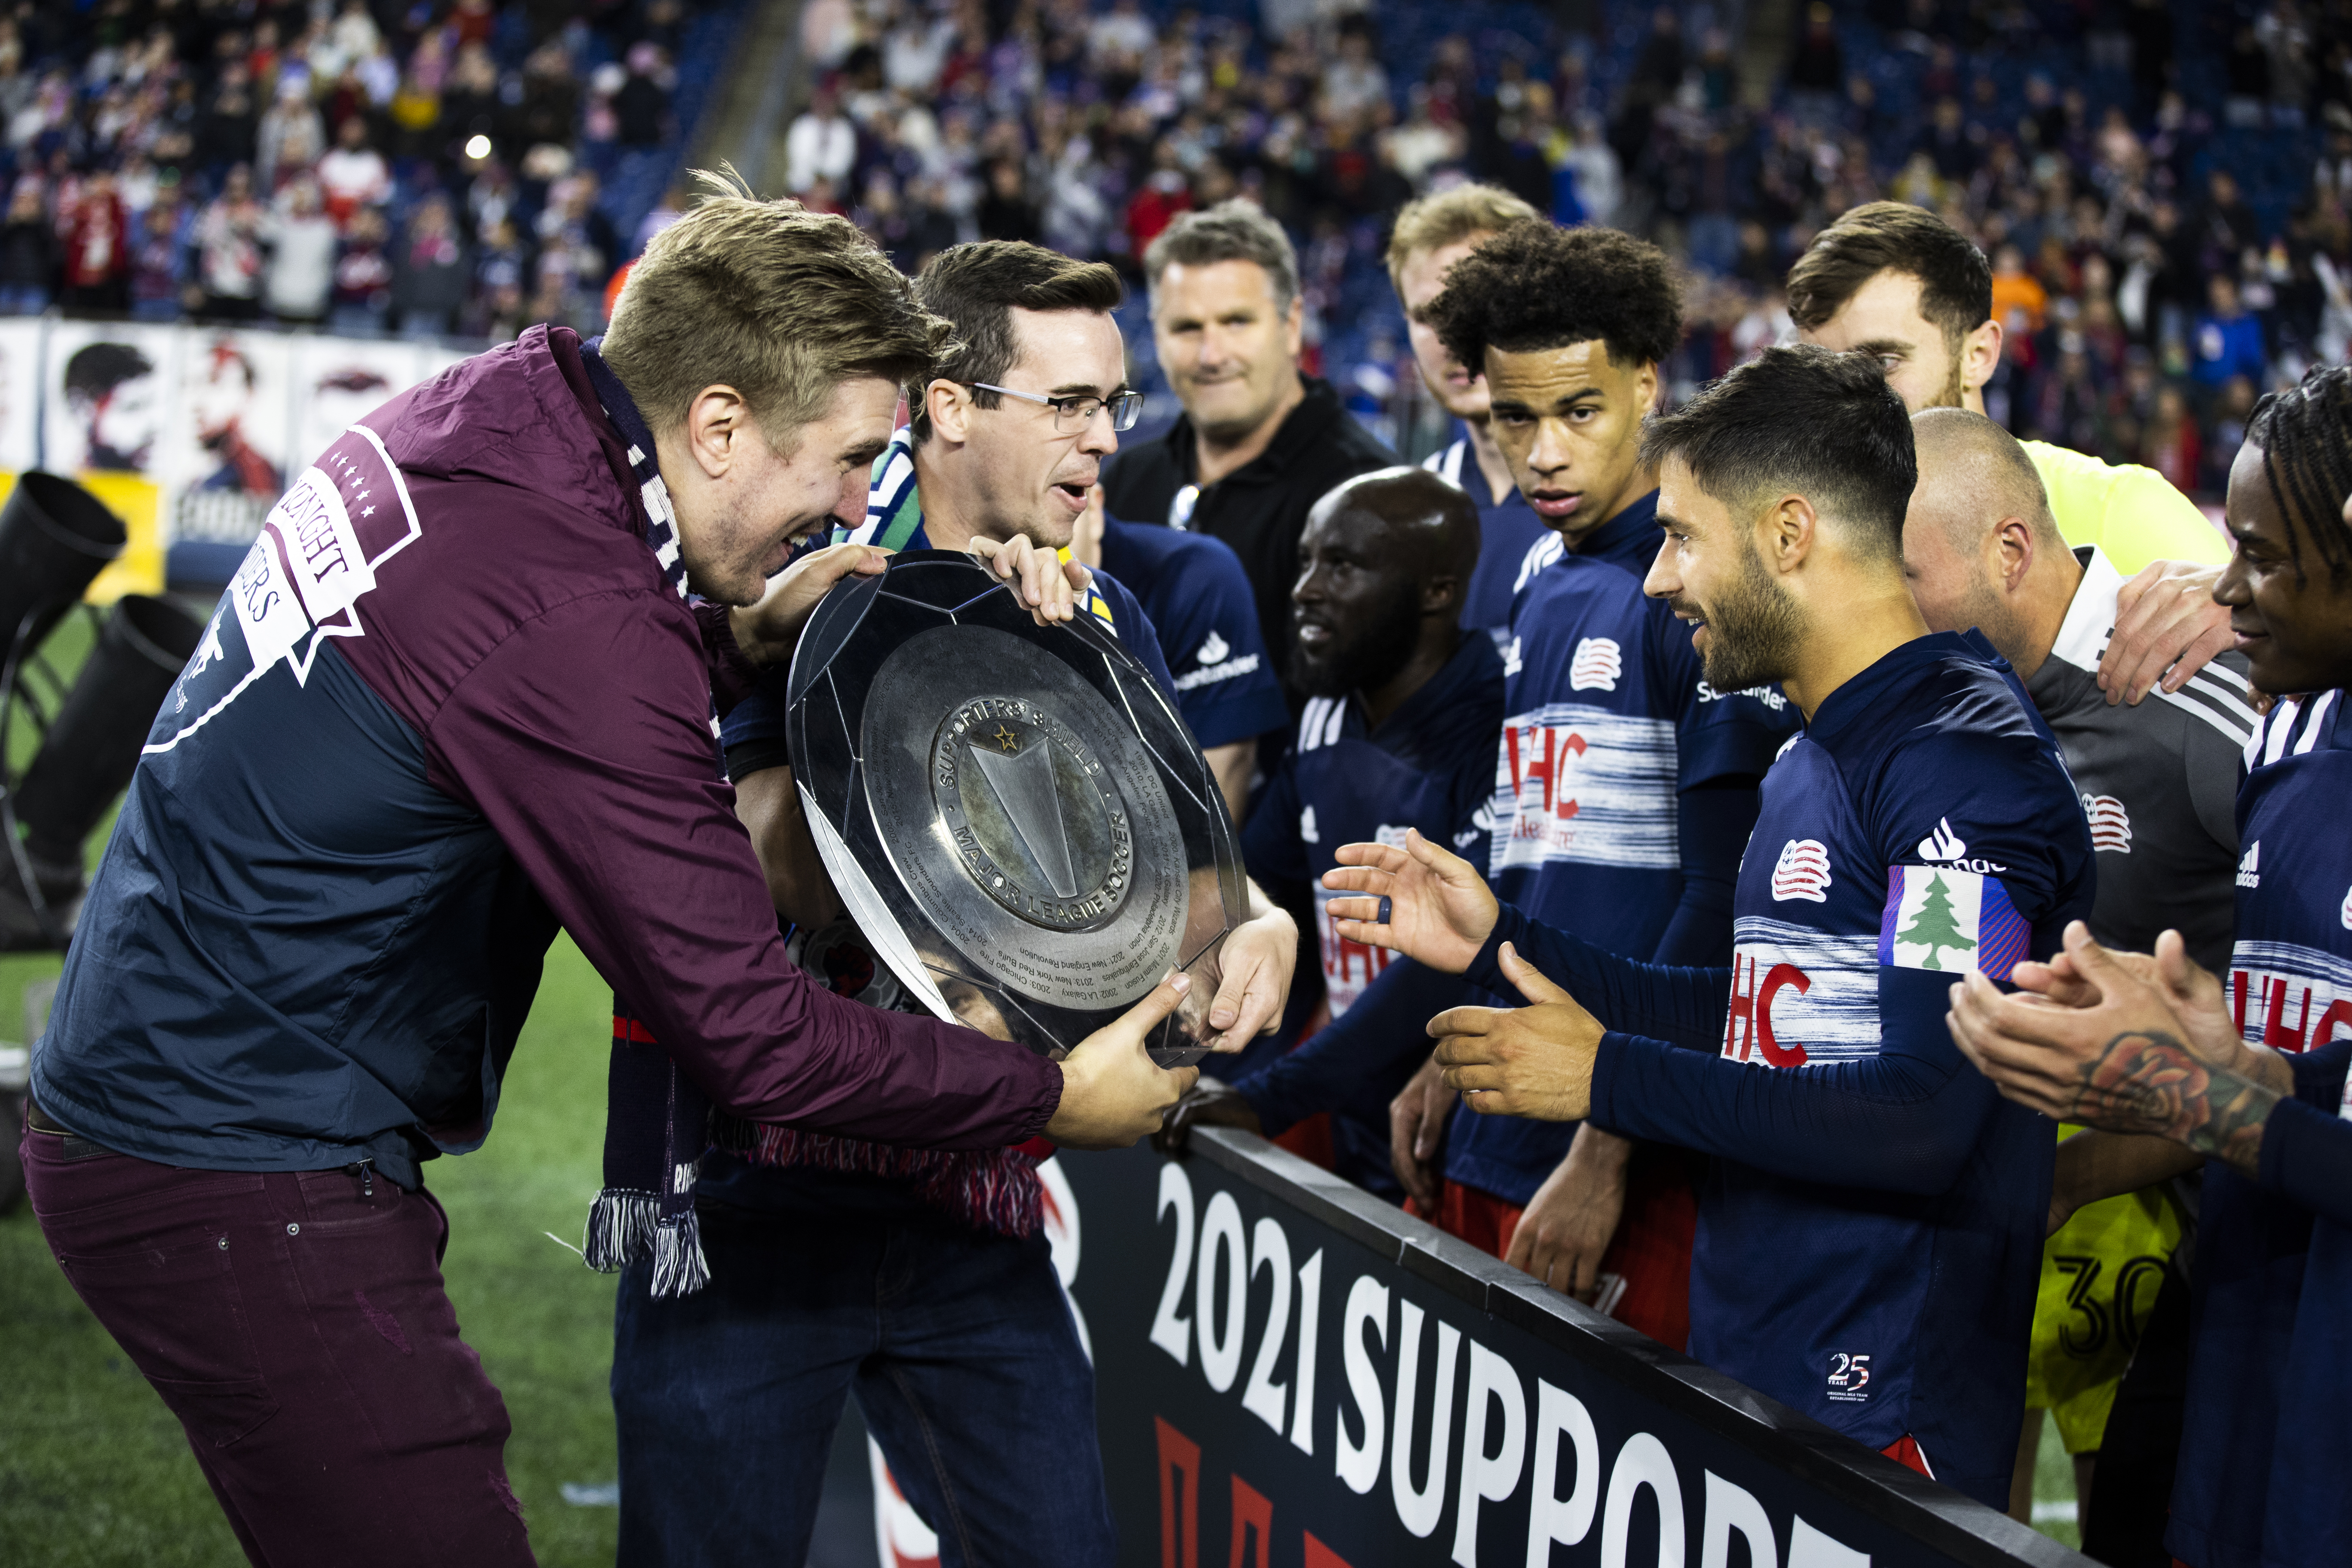 The Revolution won the Supporters' Shield, but when they want to